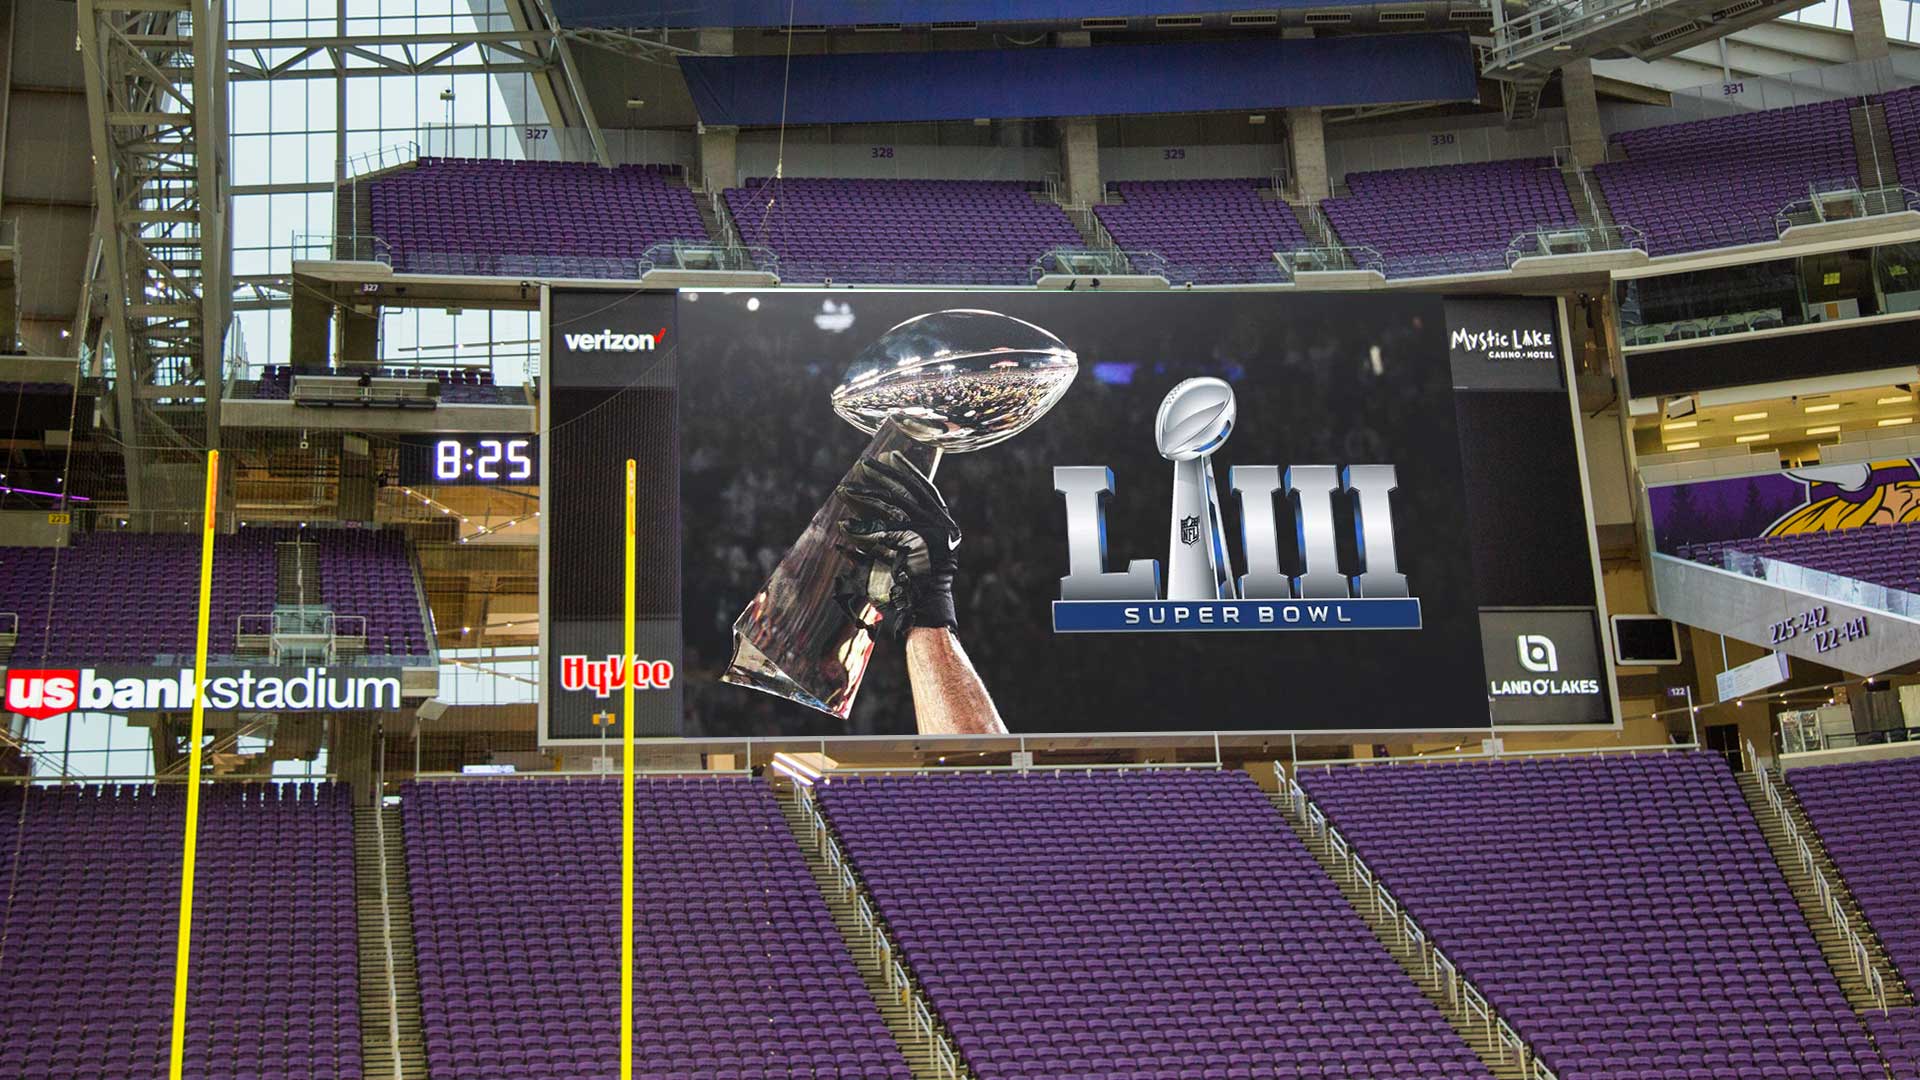 Vikings-excited-to-host-42nd-annual-Super-Bowl-watch-party.jpg